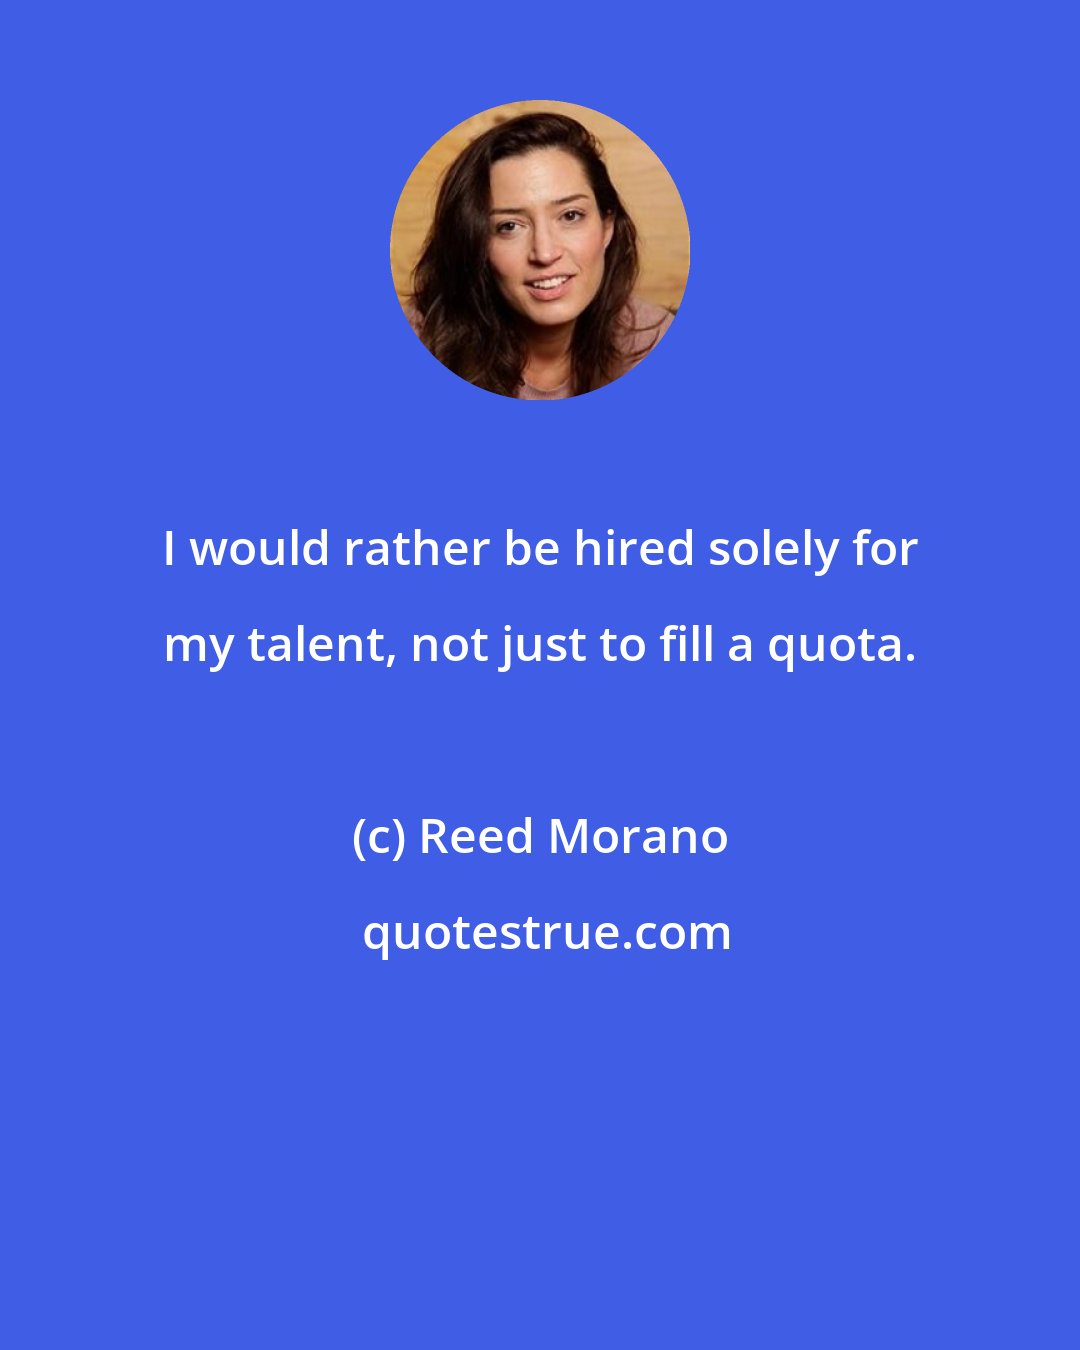 Reed Morano: I would rather be hired solely for my talent, not just to fill a quota.